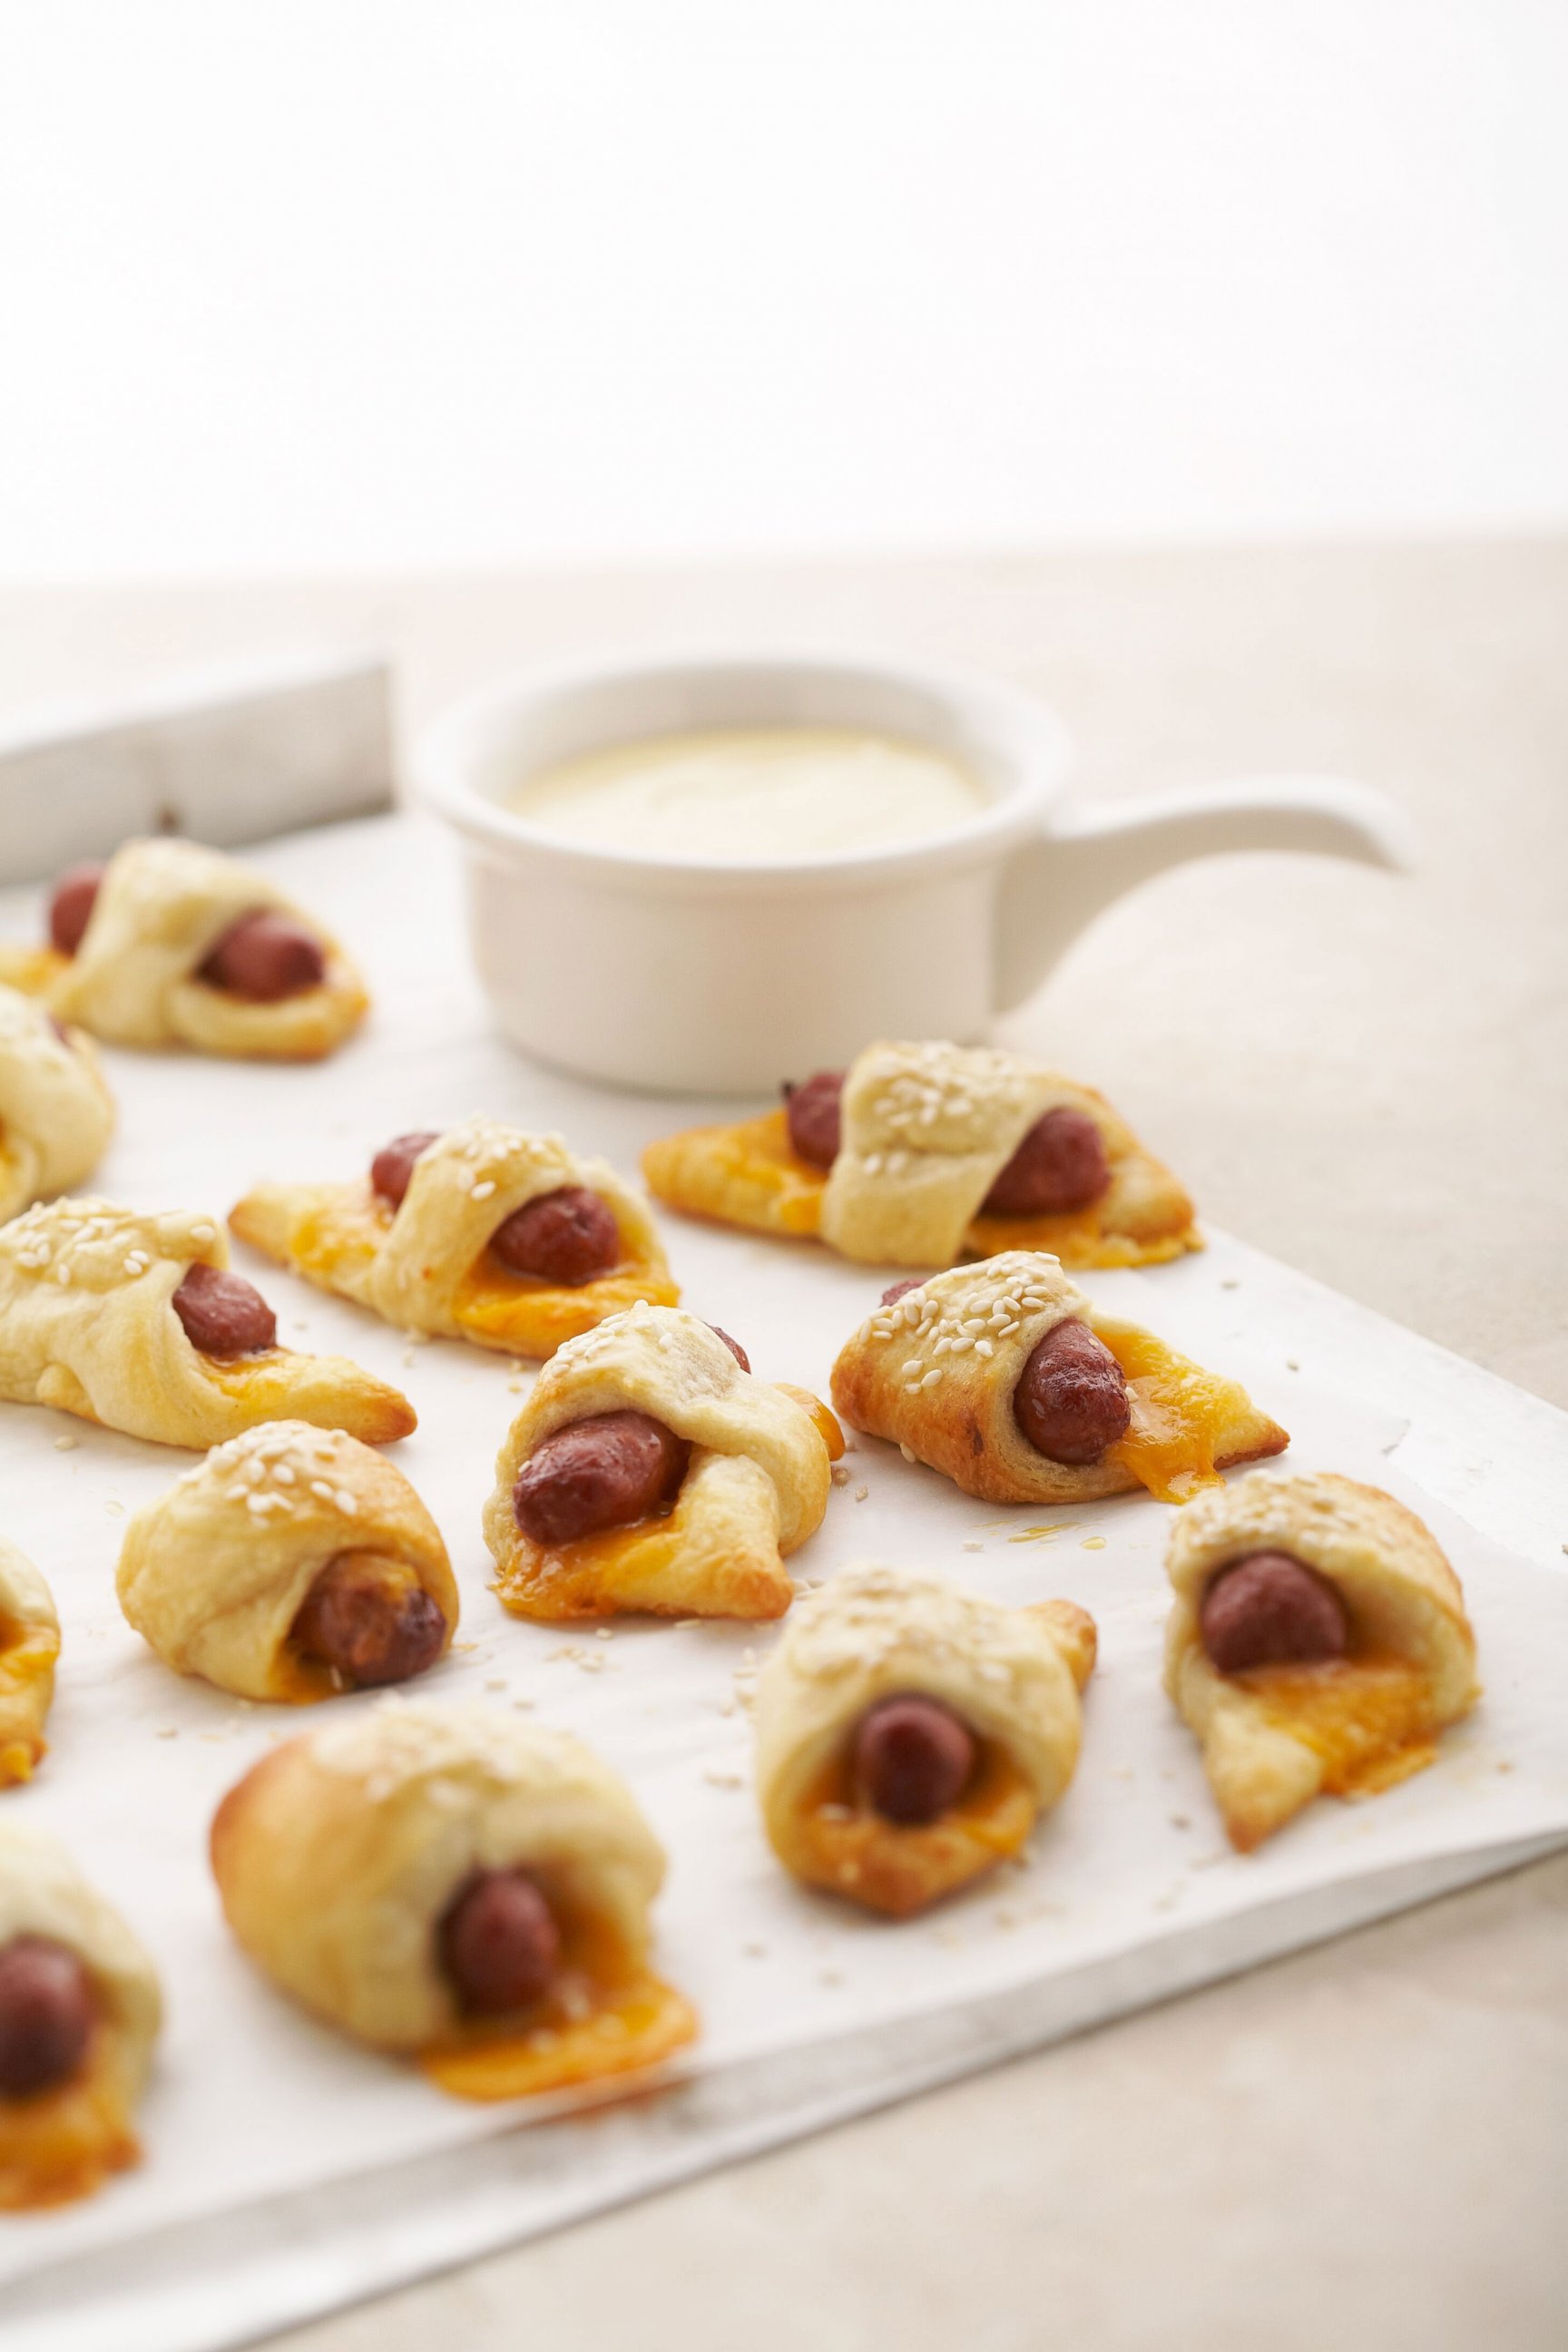 PHOTO: A photo of Sandra Lee's Recipe for Pigs in a Blanket.